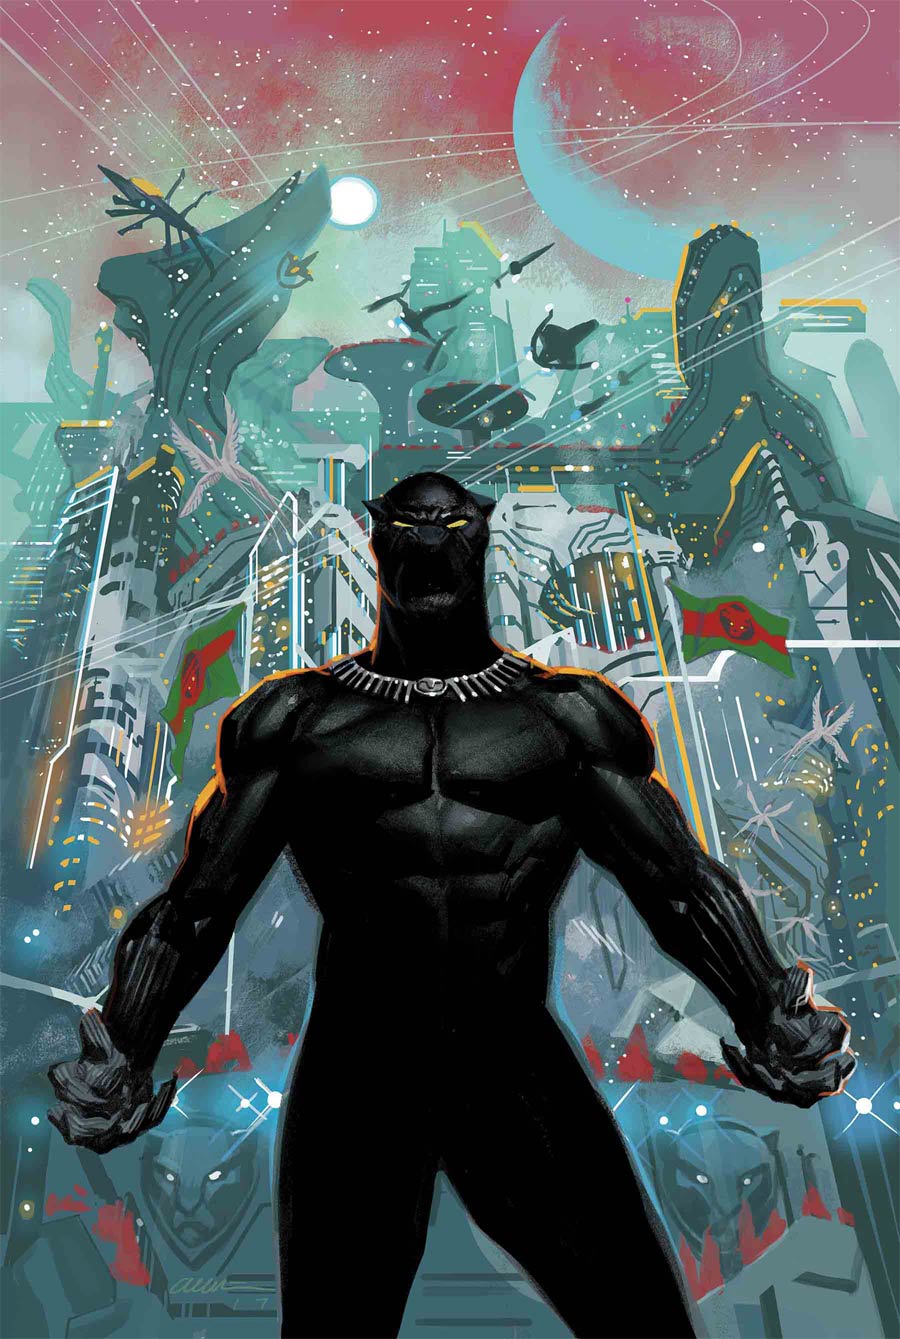 Black Panther Vol 7 #1 By Daniel Acuna Poster